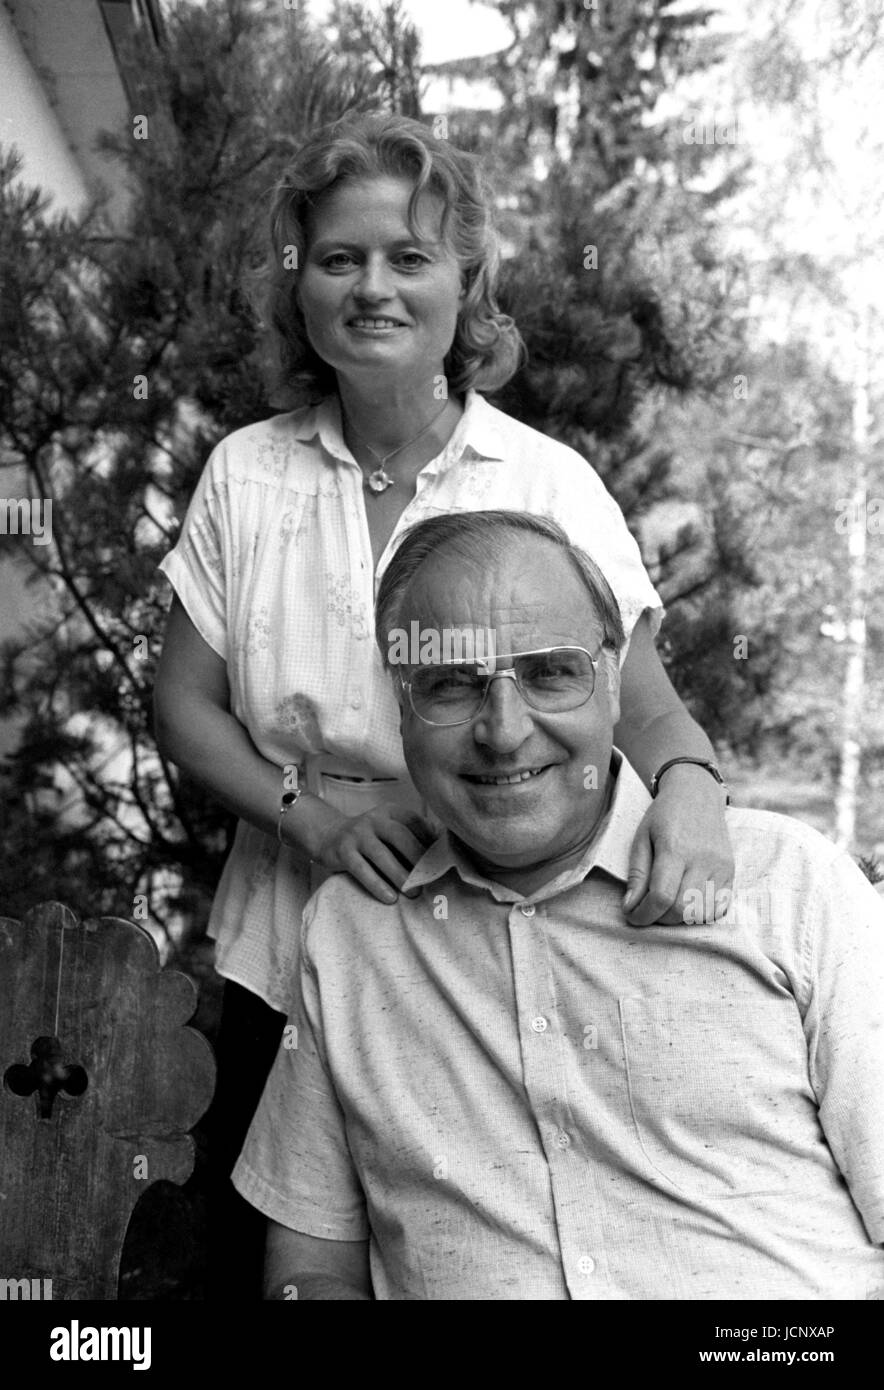 CDU chairman and minister president of Rhineland-Palatinate Helmut Kohl and his wife Hannelore Kohl during their holidays in Austria in August 1980. | usage worldwide Stock Photo